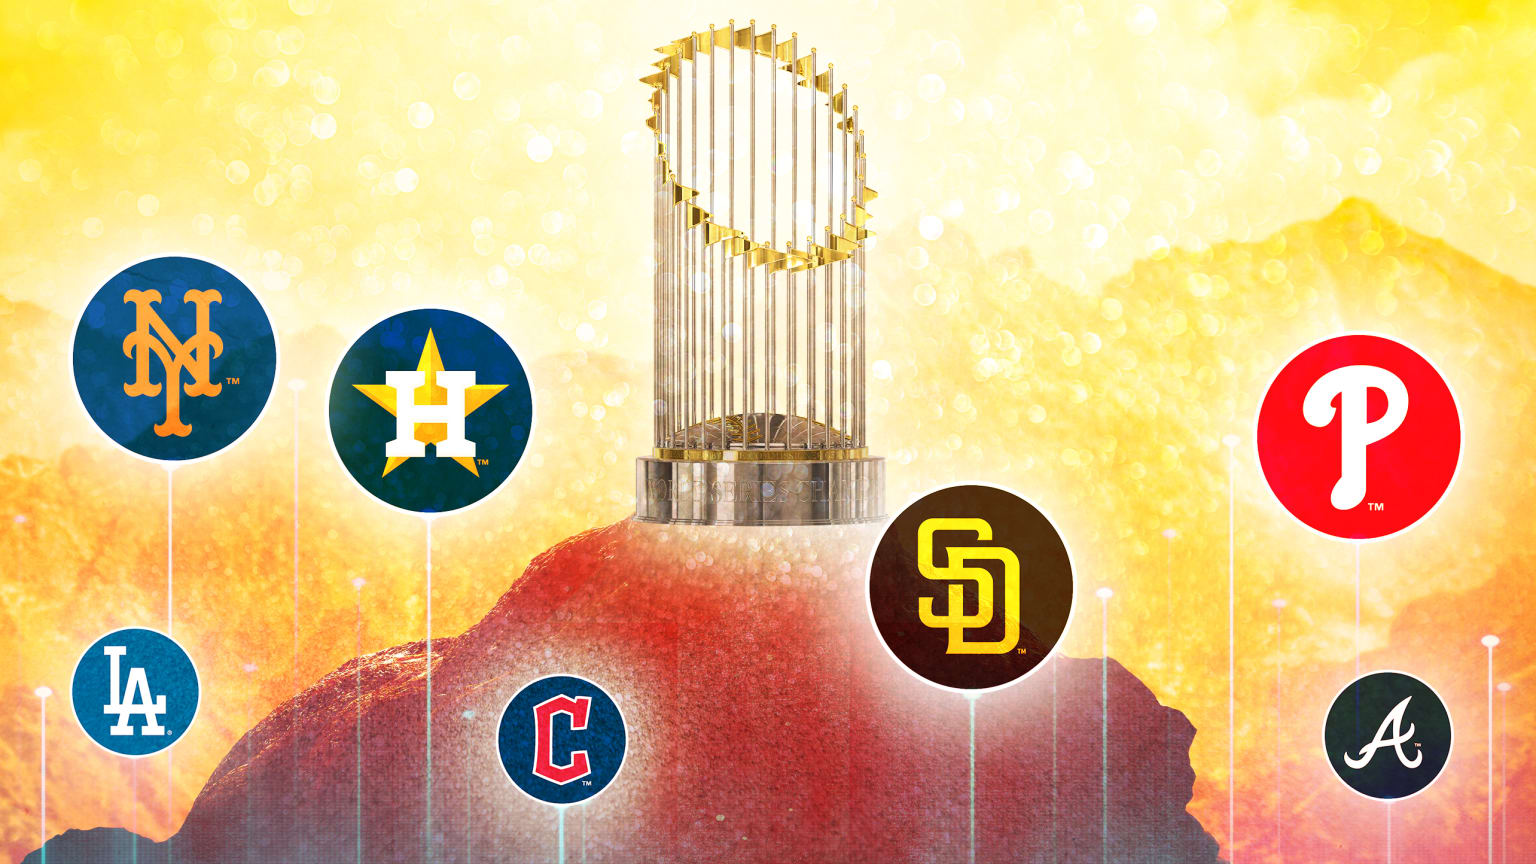 A photo illustration shows the World Series trophy behind six team logos